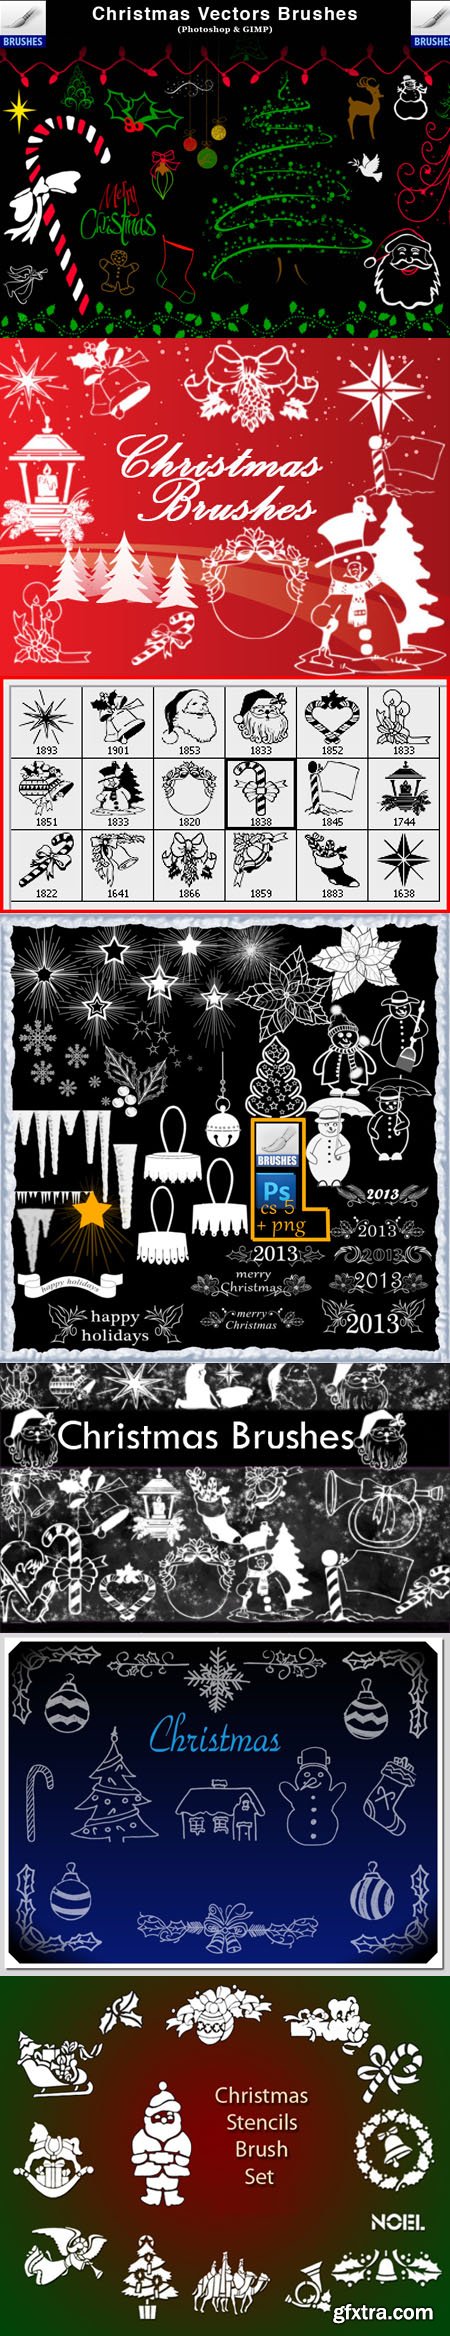 Christmas Vector Brushes for Photoshop